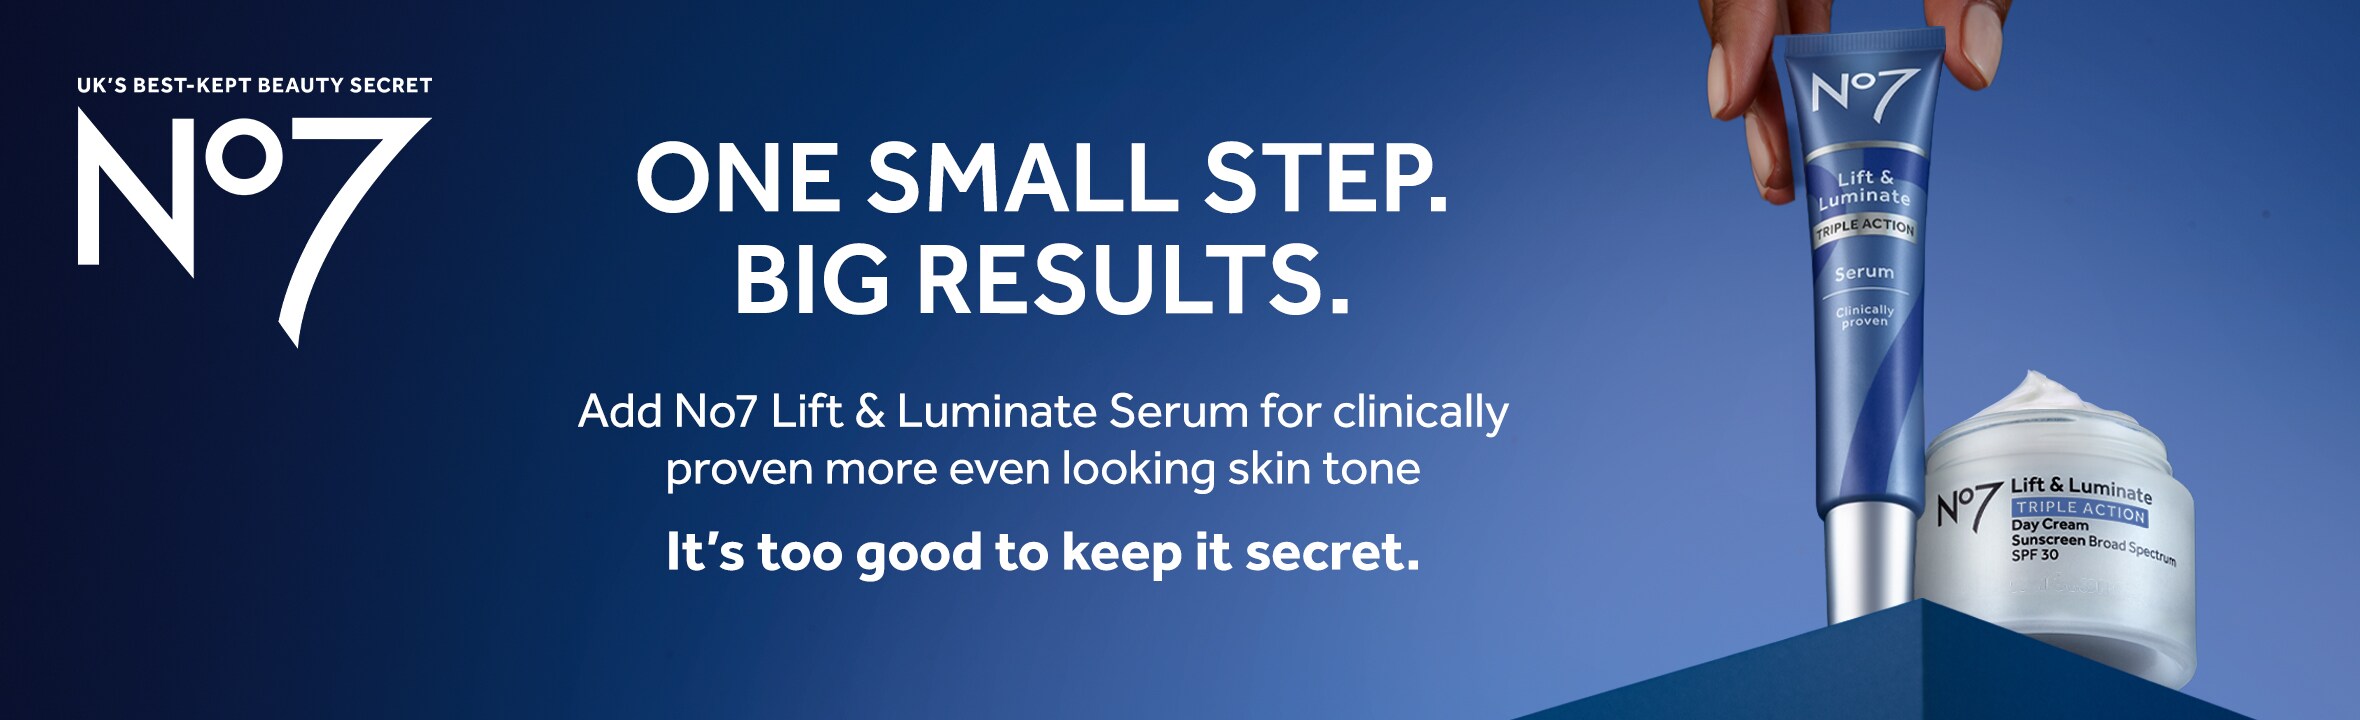 UK's best kept beauty secret. No7. One small step. Big results. Add No7 Life & Luminate Serum for clinically proven more even looking skin tone. It's too good to keep it secret.